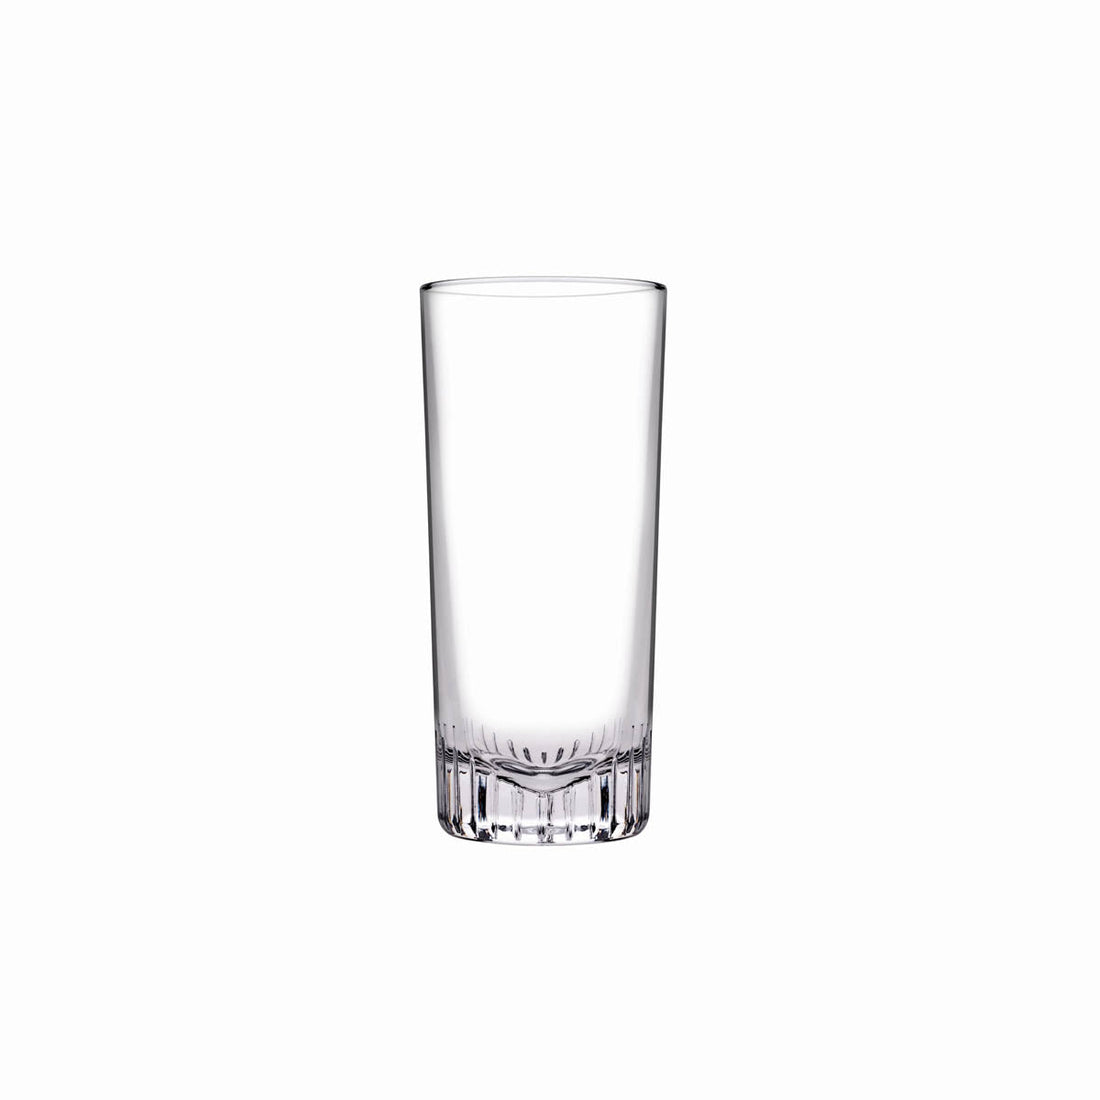 NUDE Caldera highball glass, with a v-shaped heavy bottom, presented empty on a white background